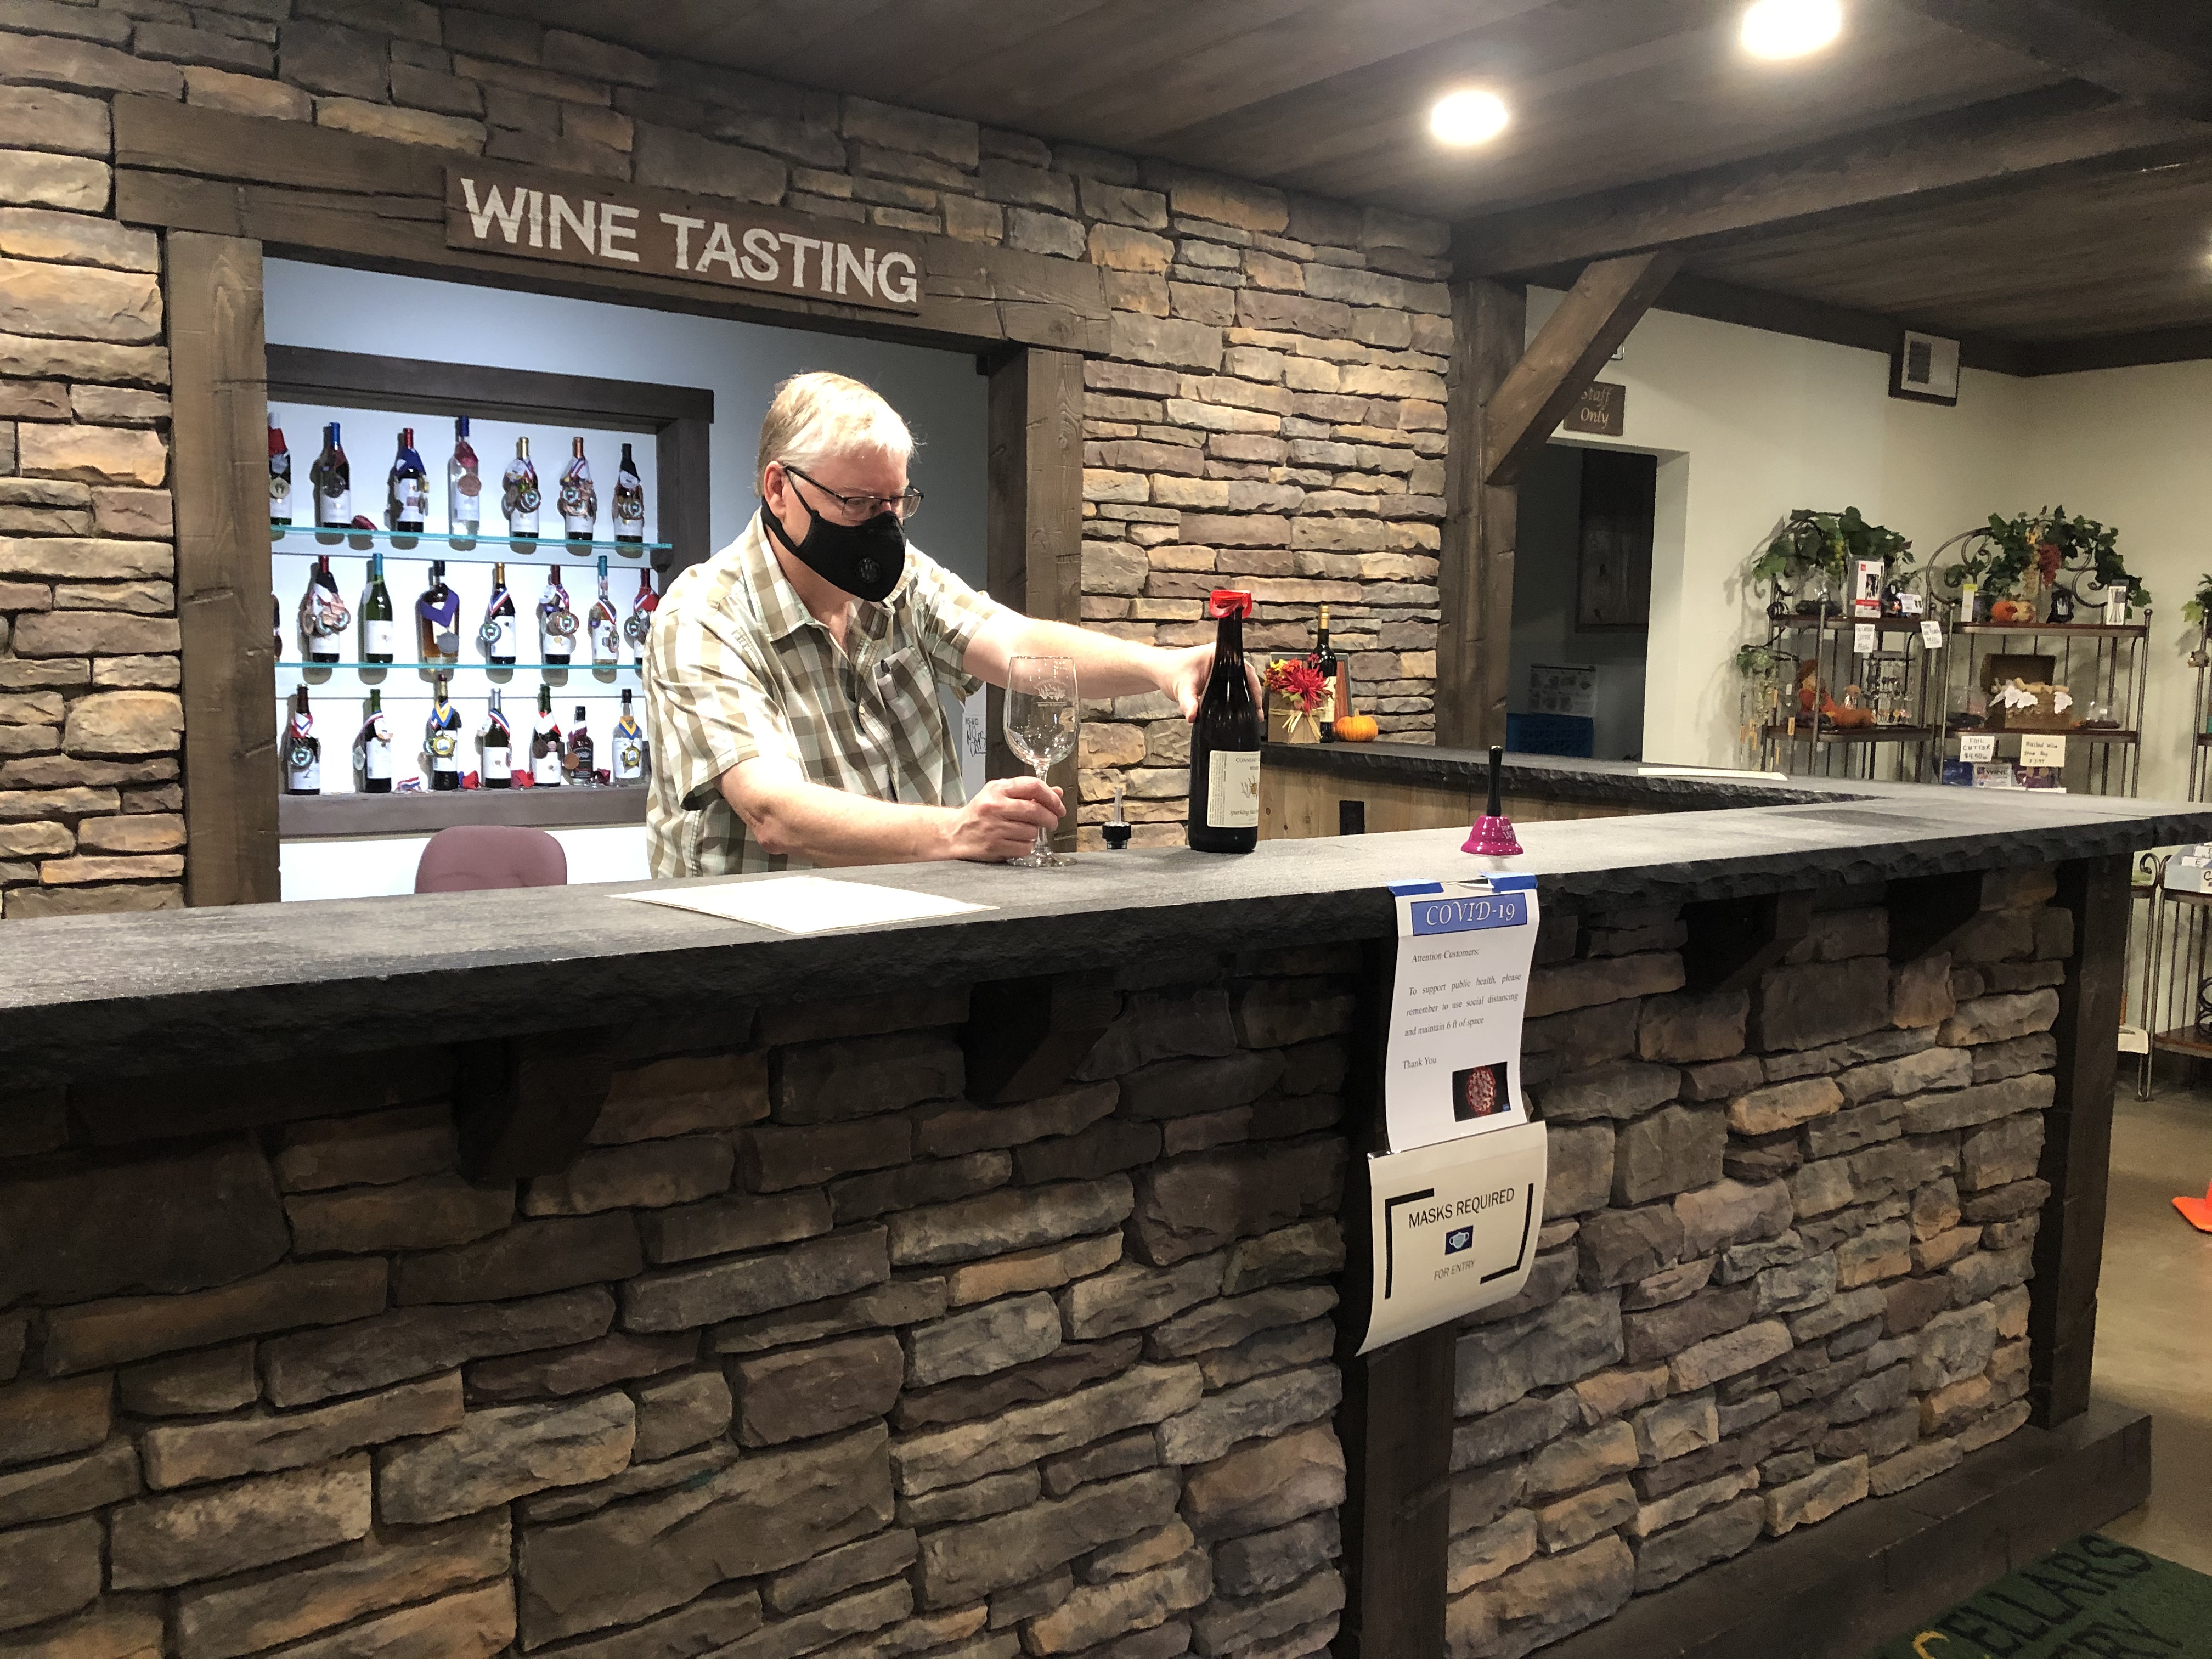 Joal Wolf, owner of Conneaut Cellars offering wine tasting at Conneaut Cellars Winery & Distillery.